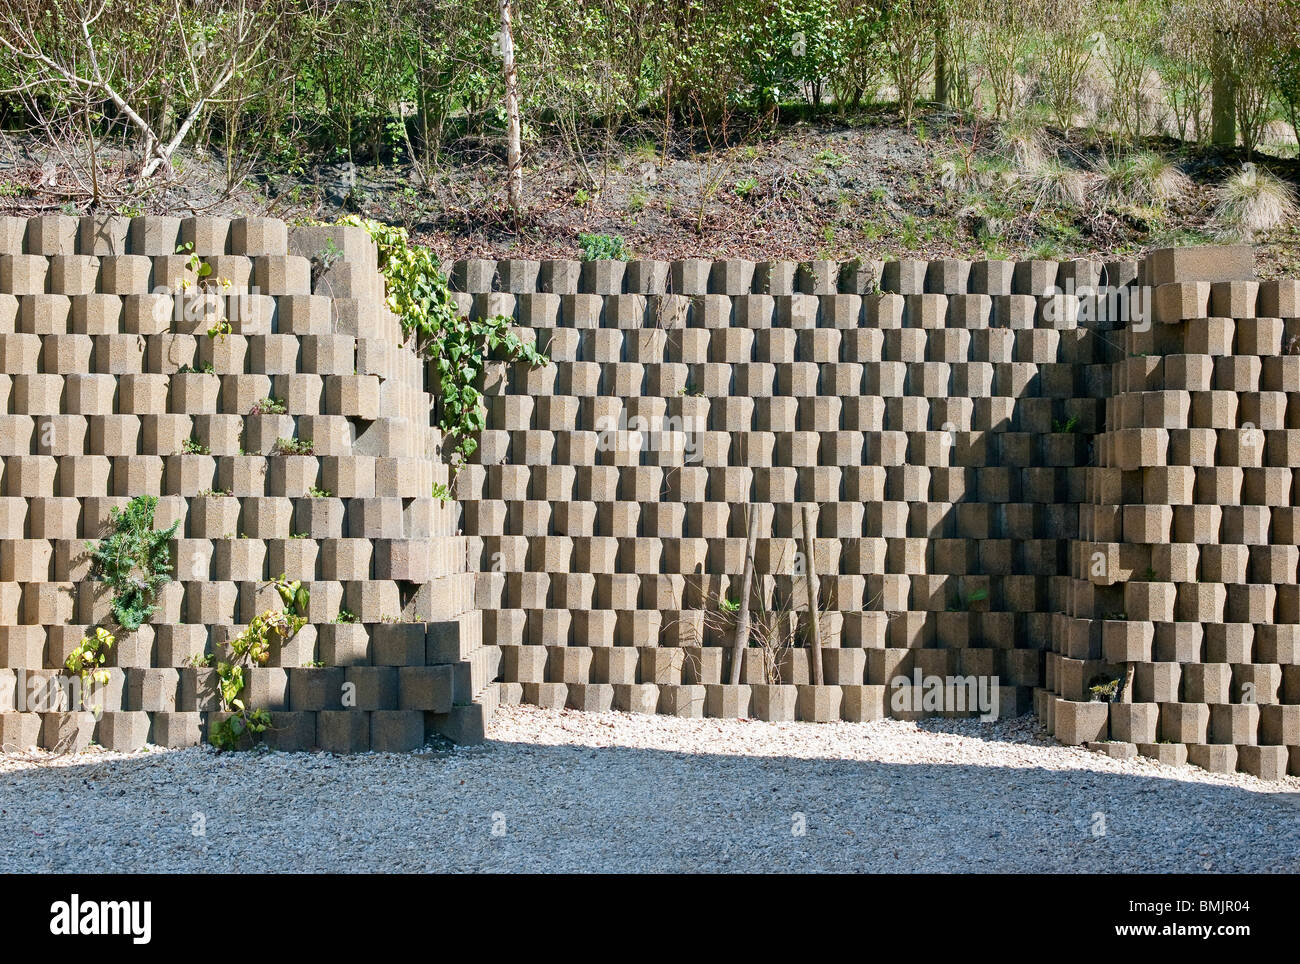 Neat concrete block retaining wall at bottom of hill-side garden Stock Photo